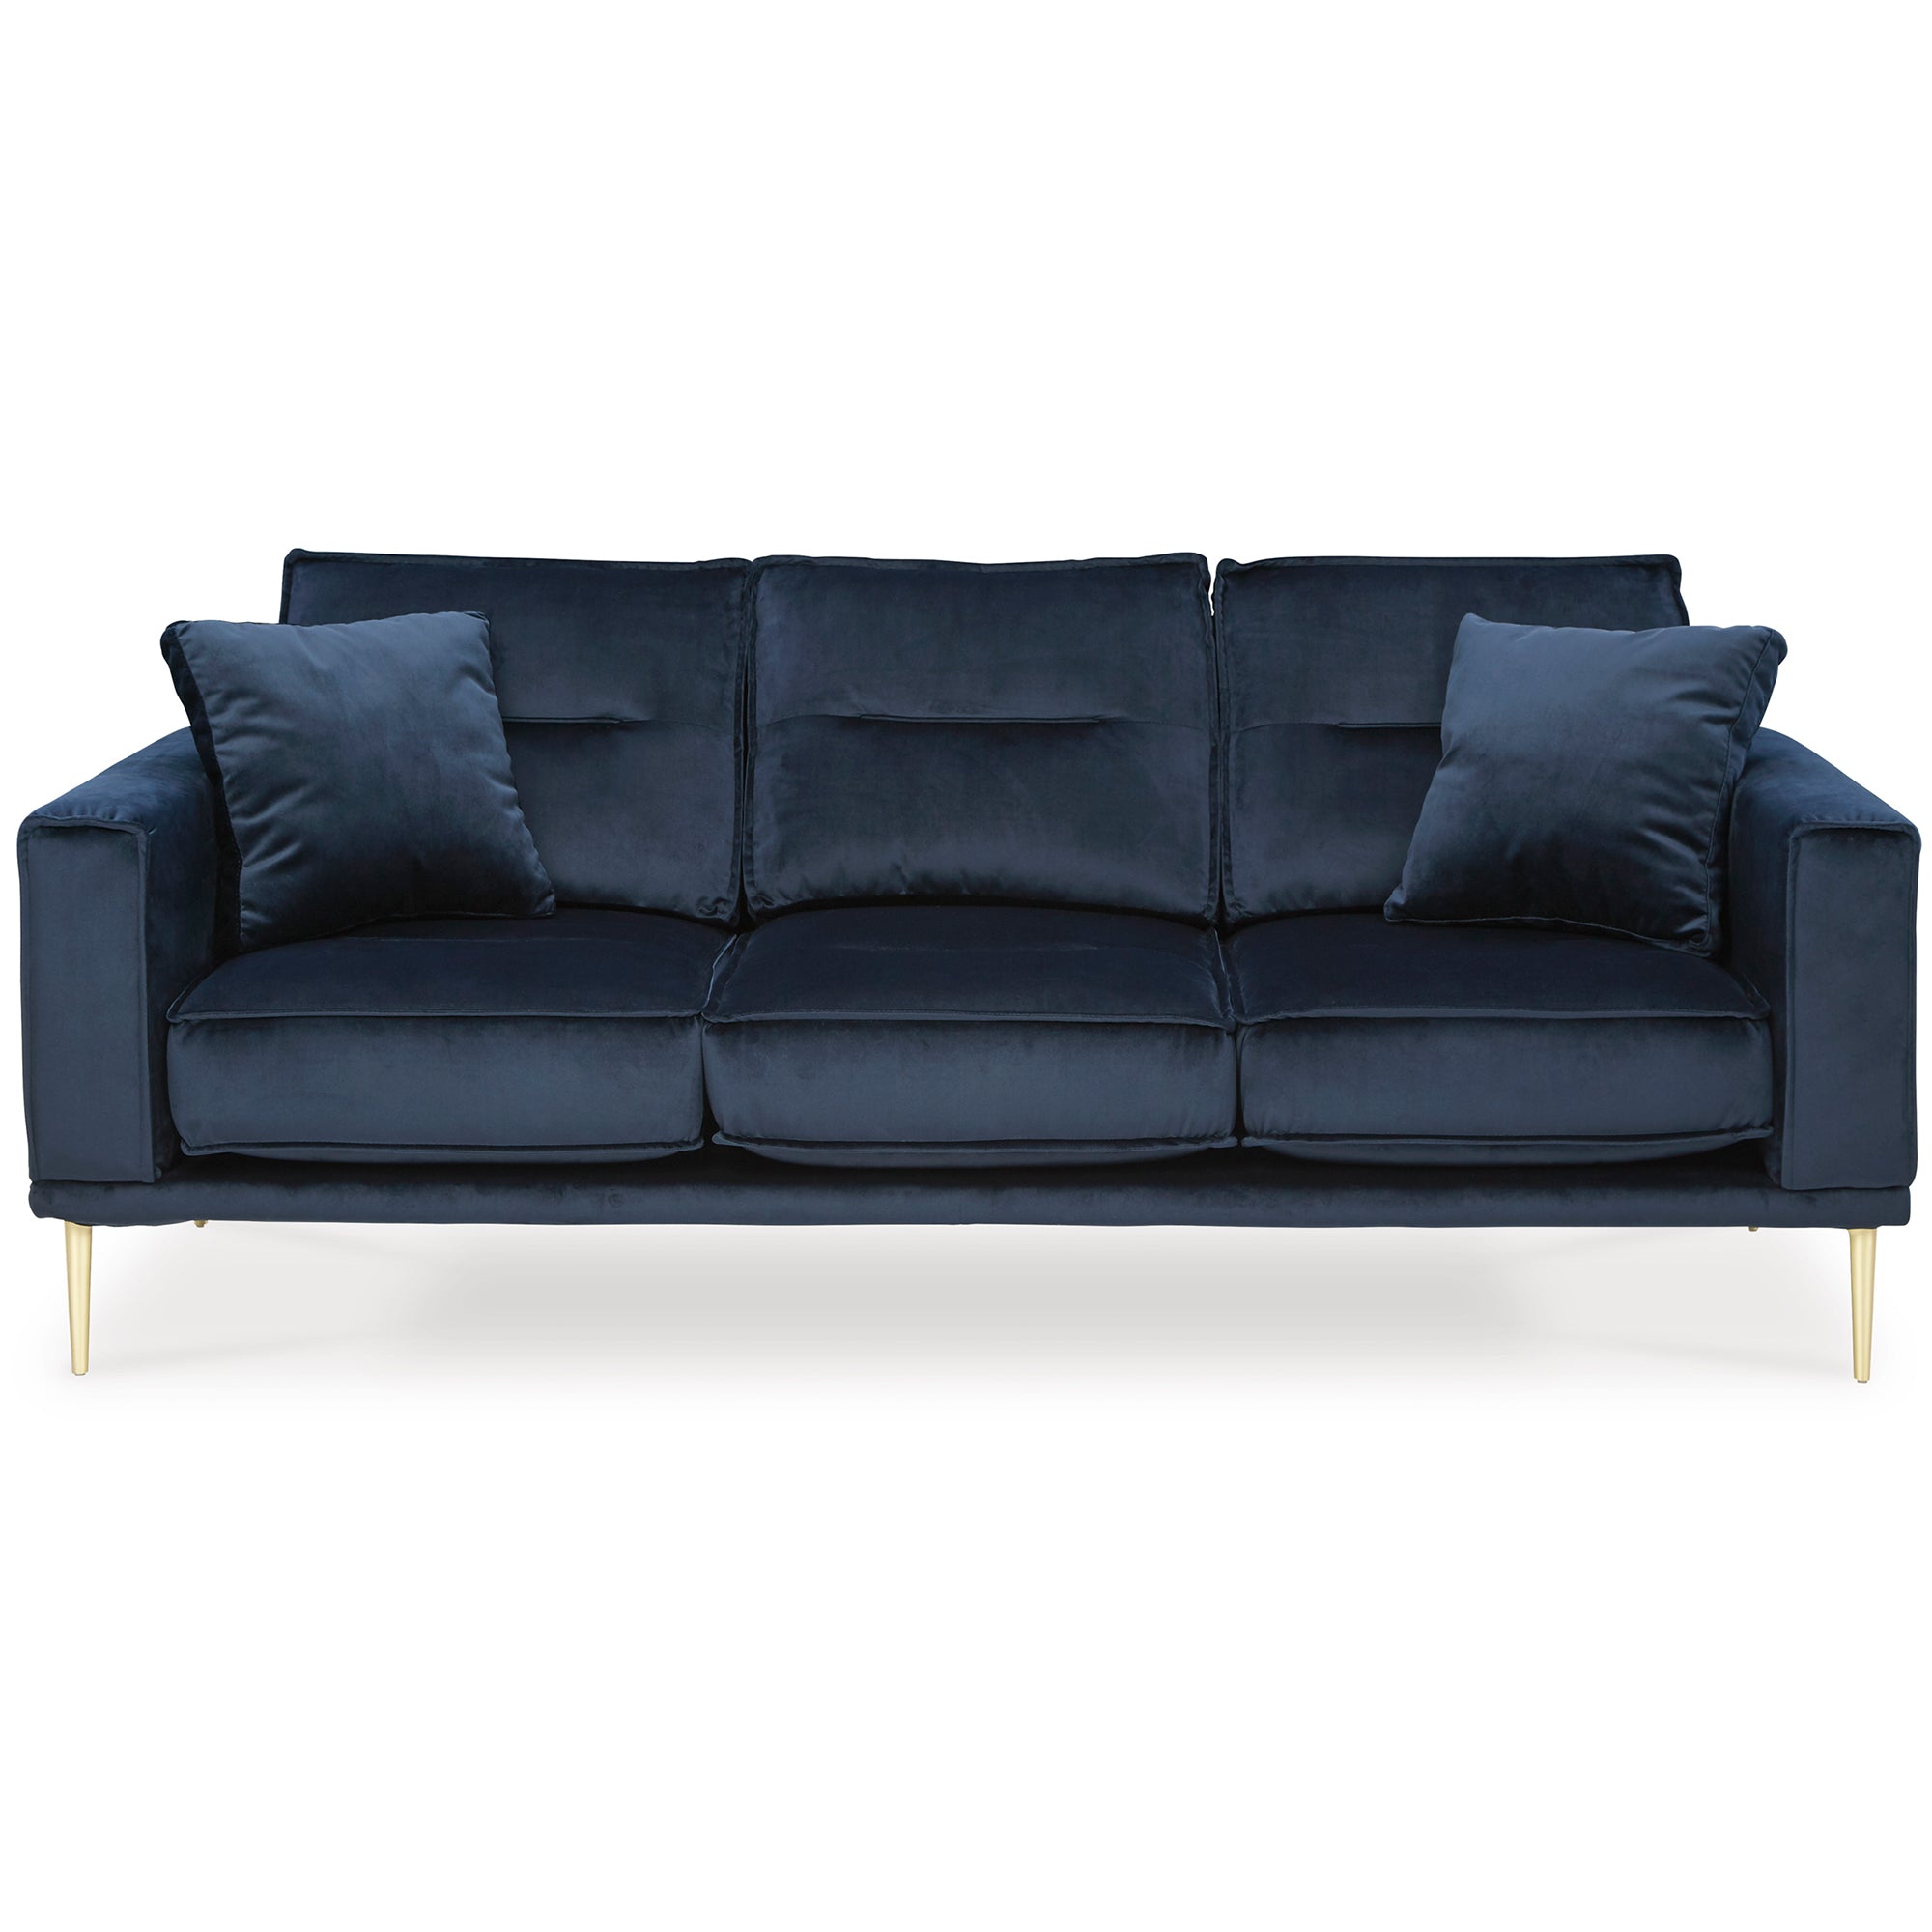 Macleary Sofa and Loveseat